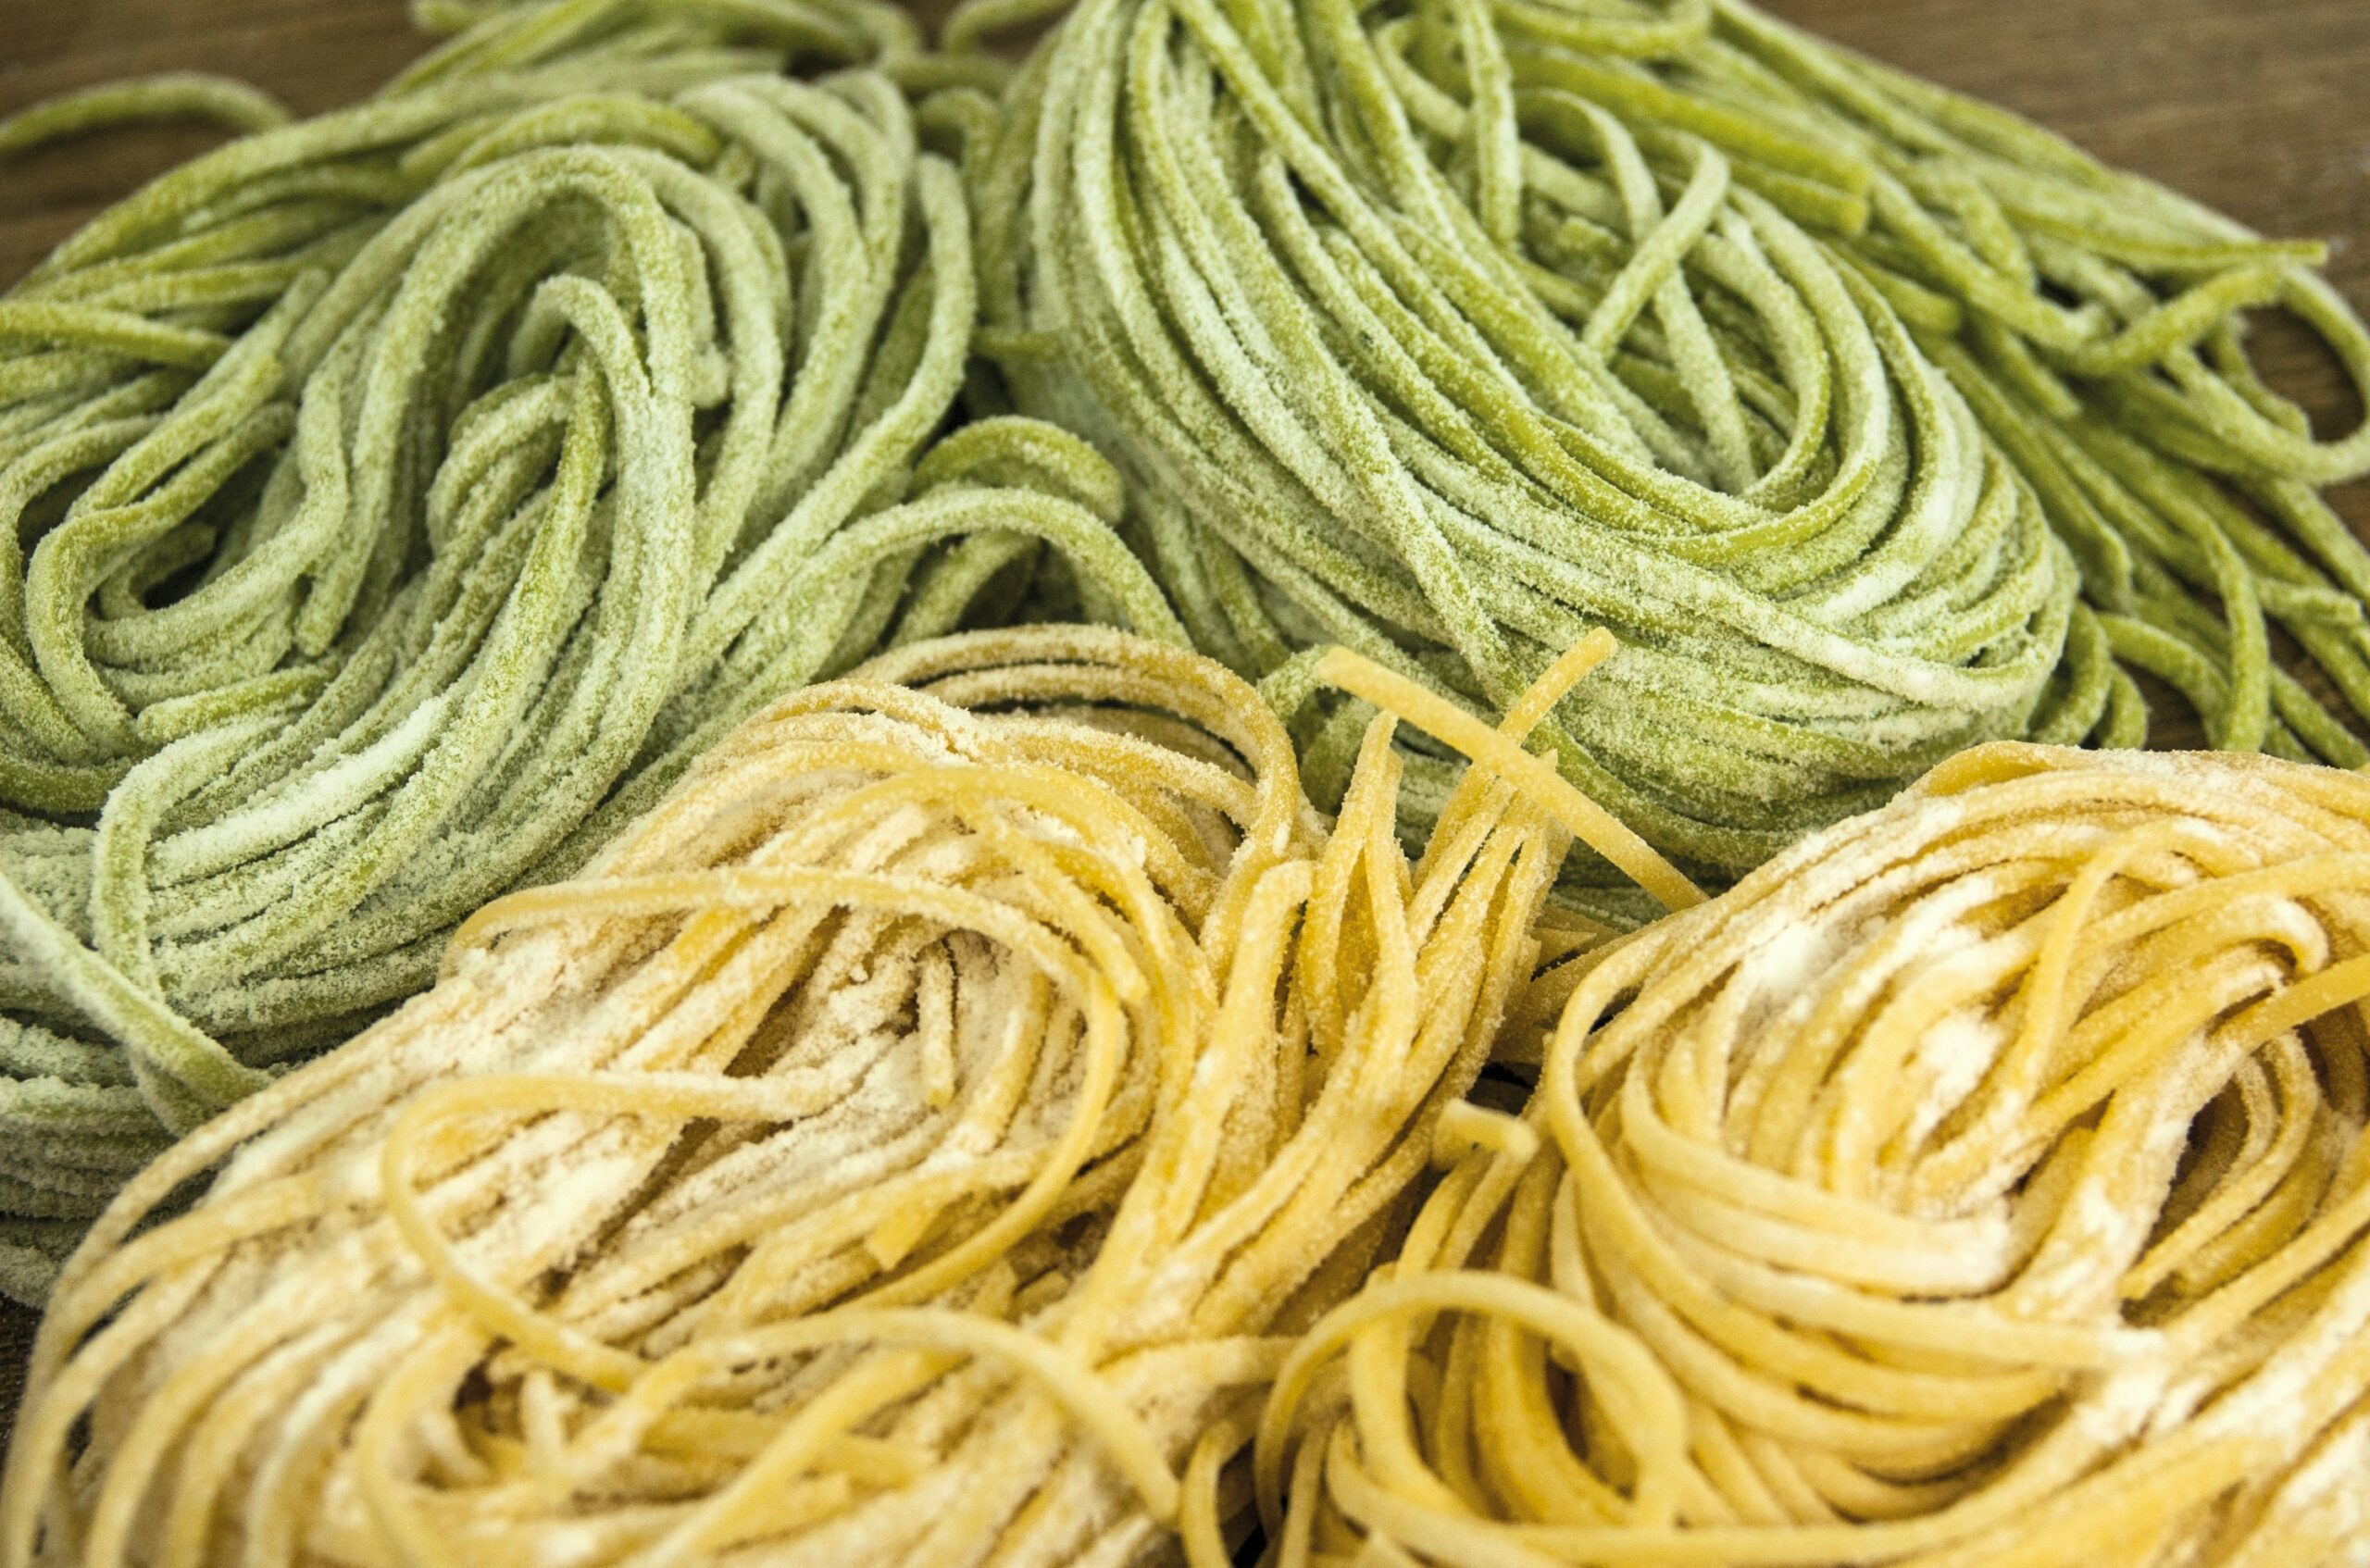 Image of green and yellow bundles of uncooked fresh spaghetti